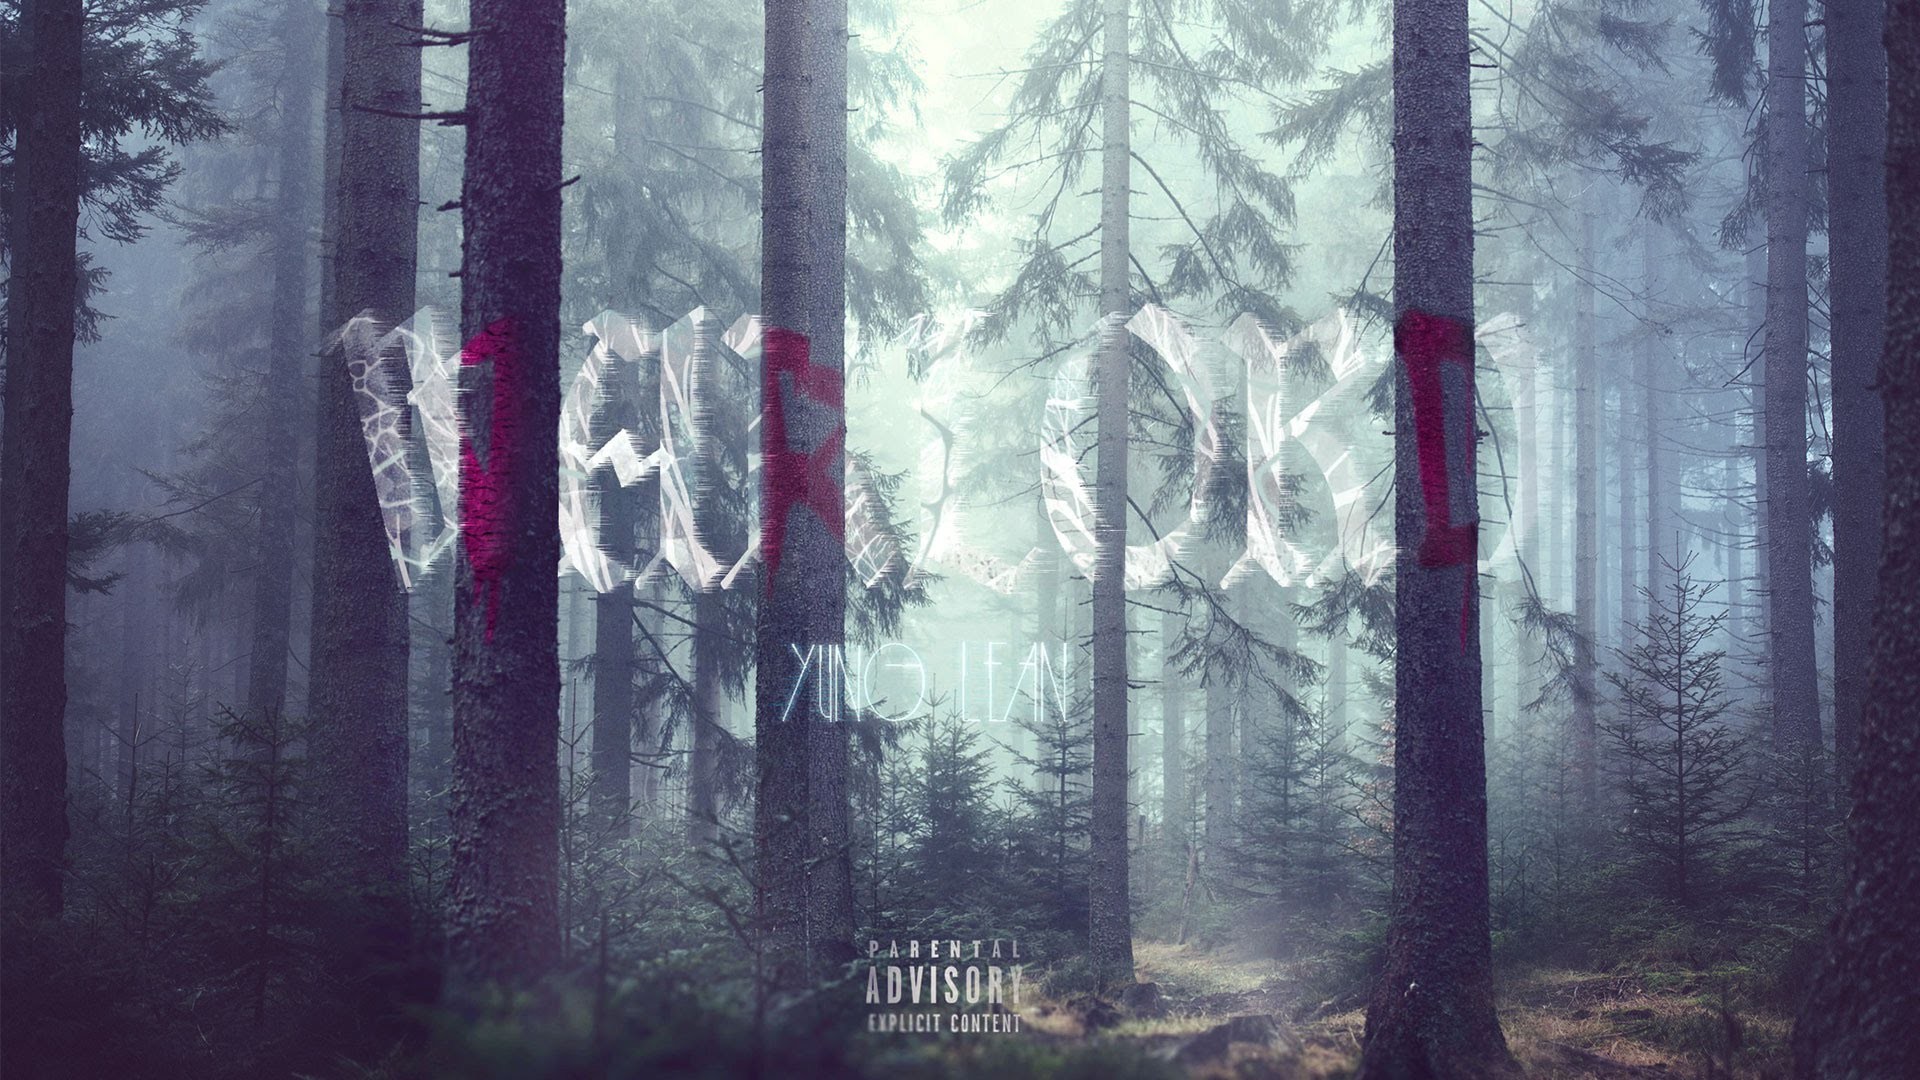 1920x1080, Warlord [yung Lean] - Alone In The Wood - HD Wallpaper 